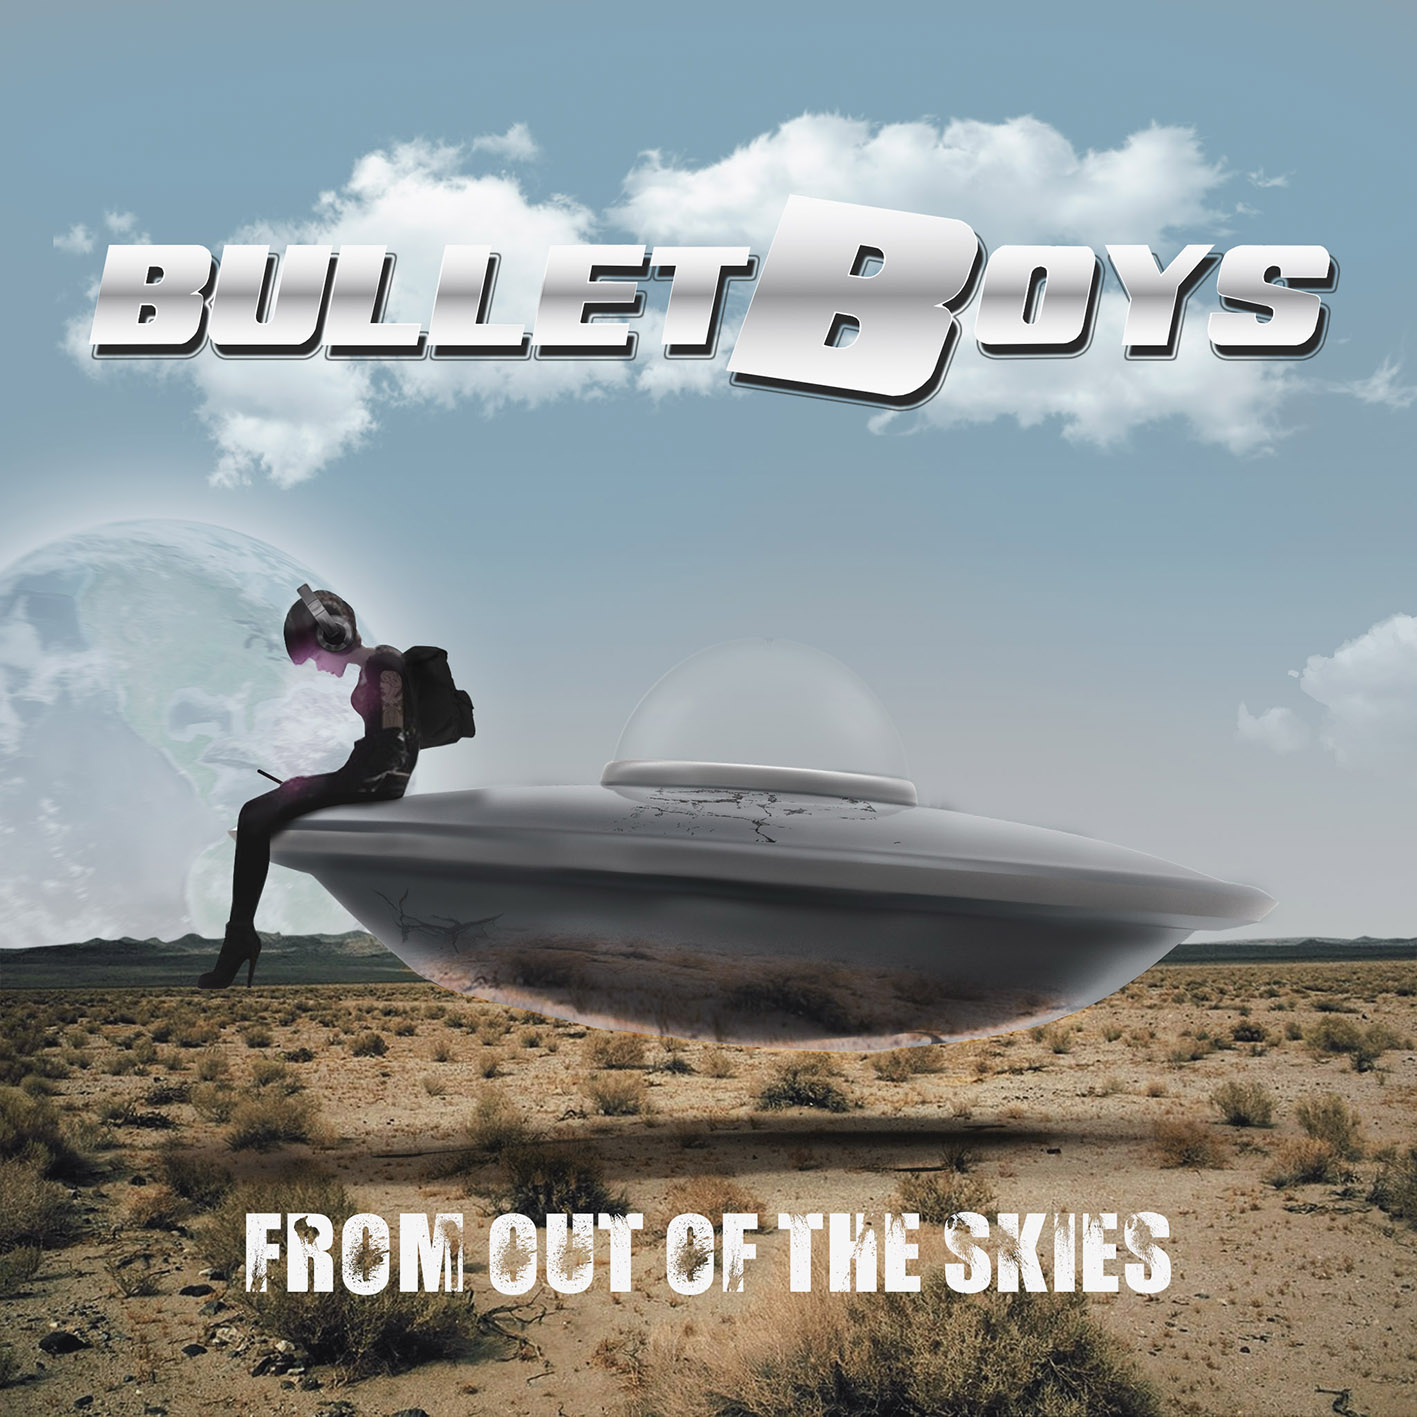 BulletBoys – From Out of the Skies[_cover